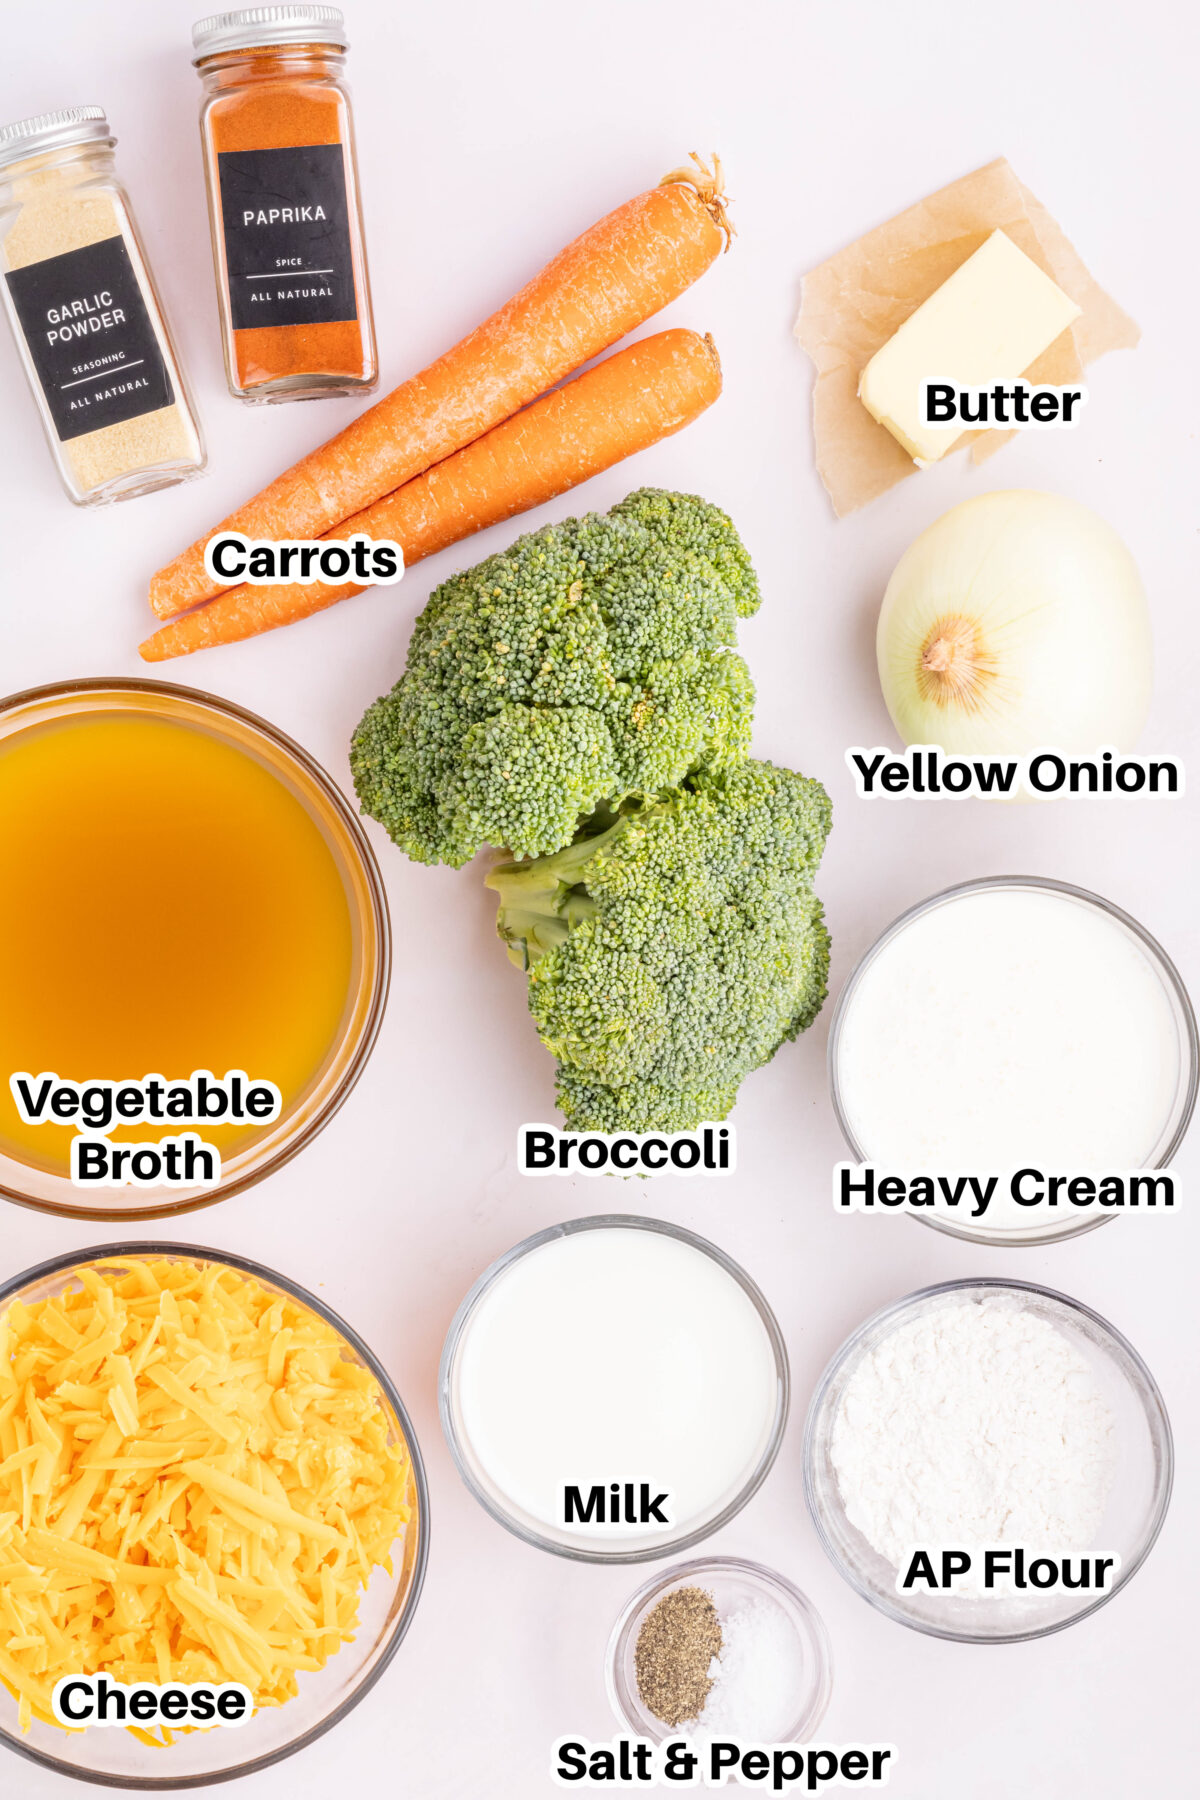 Ingredients for Broccoli Cheddar Soup.